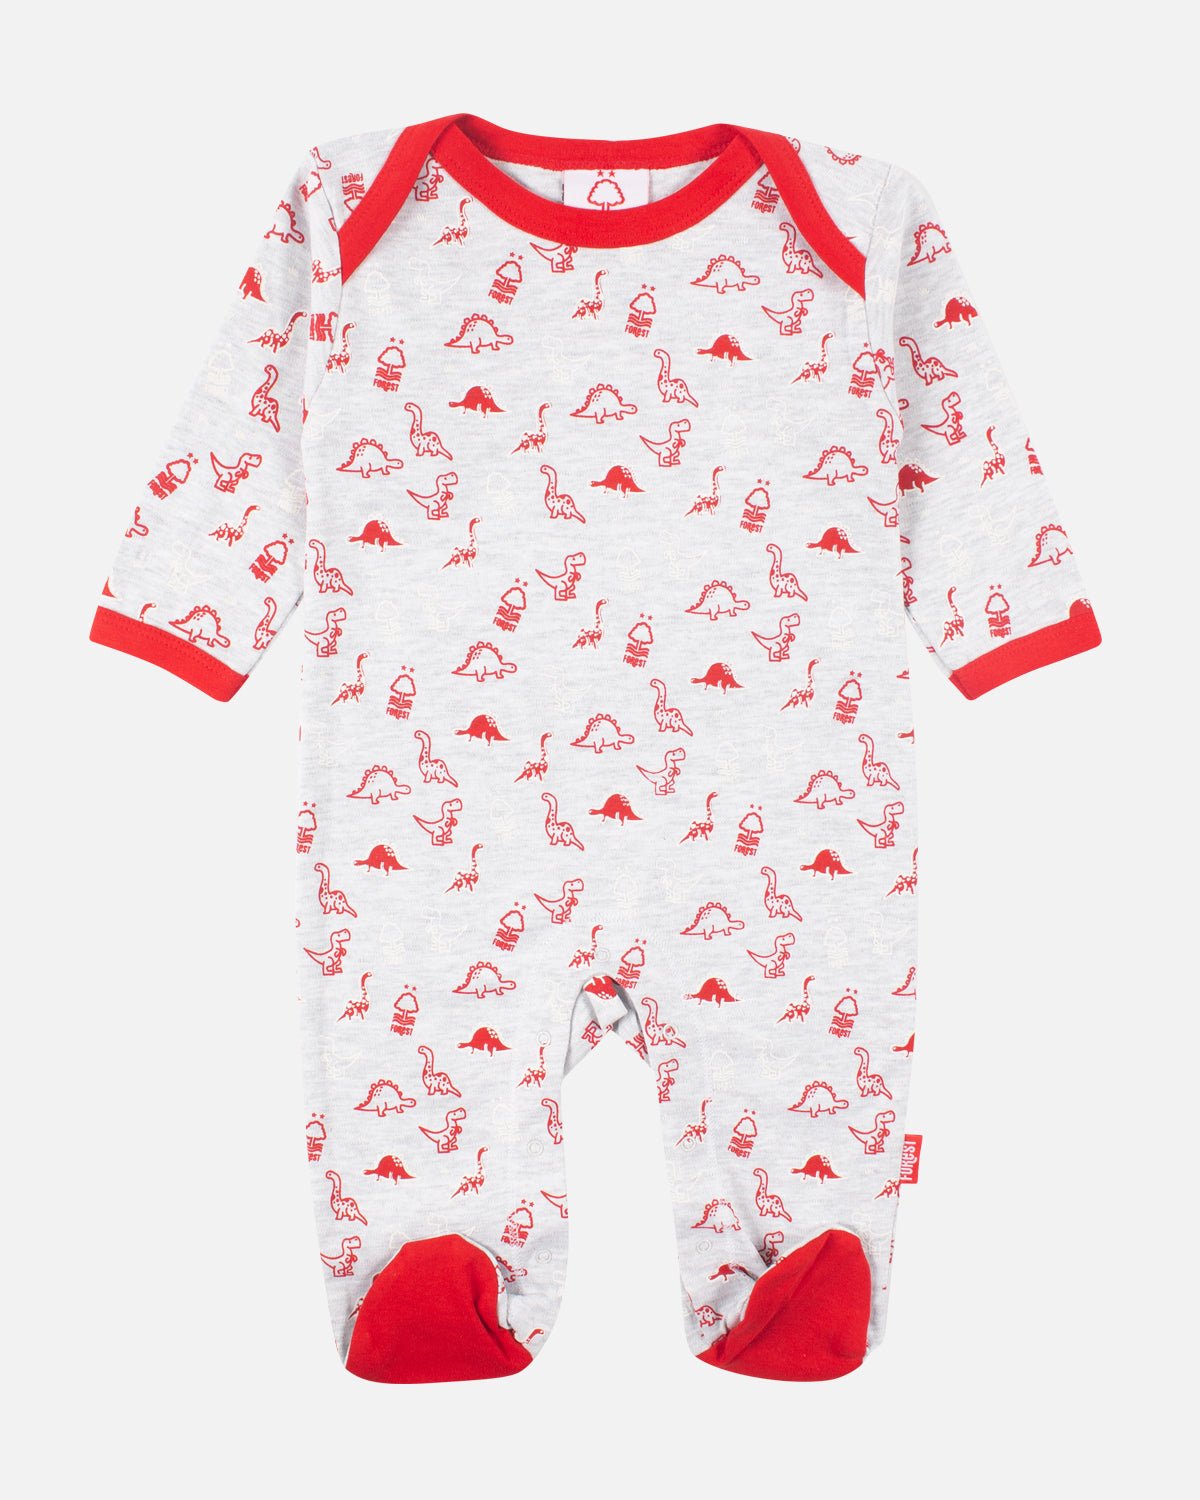 NFFC Dino Baby Sleepsuit - Nottingham Forest FC